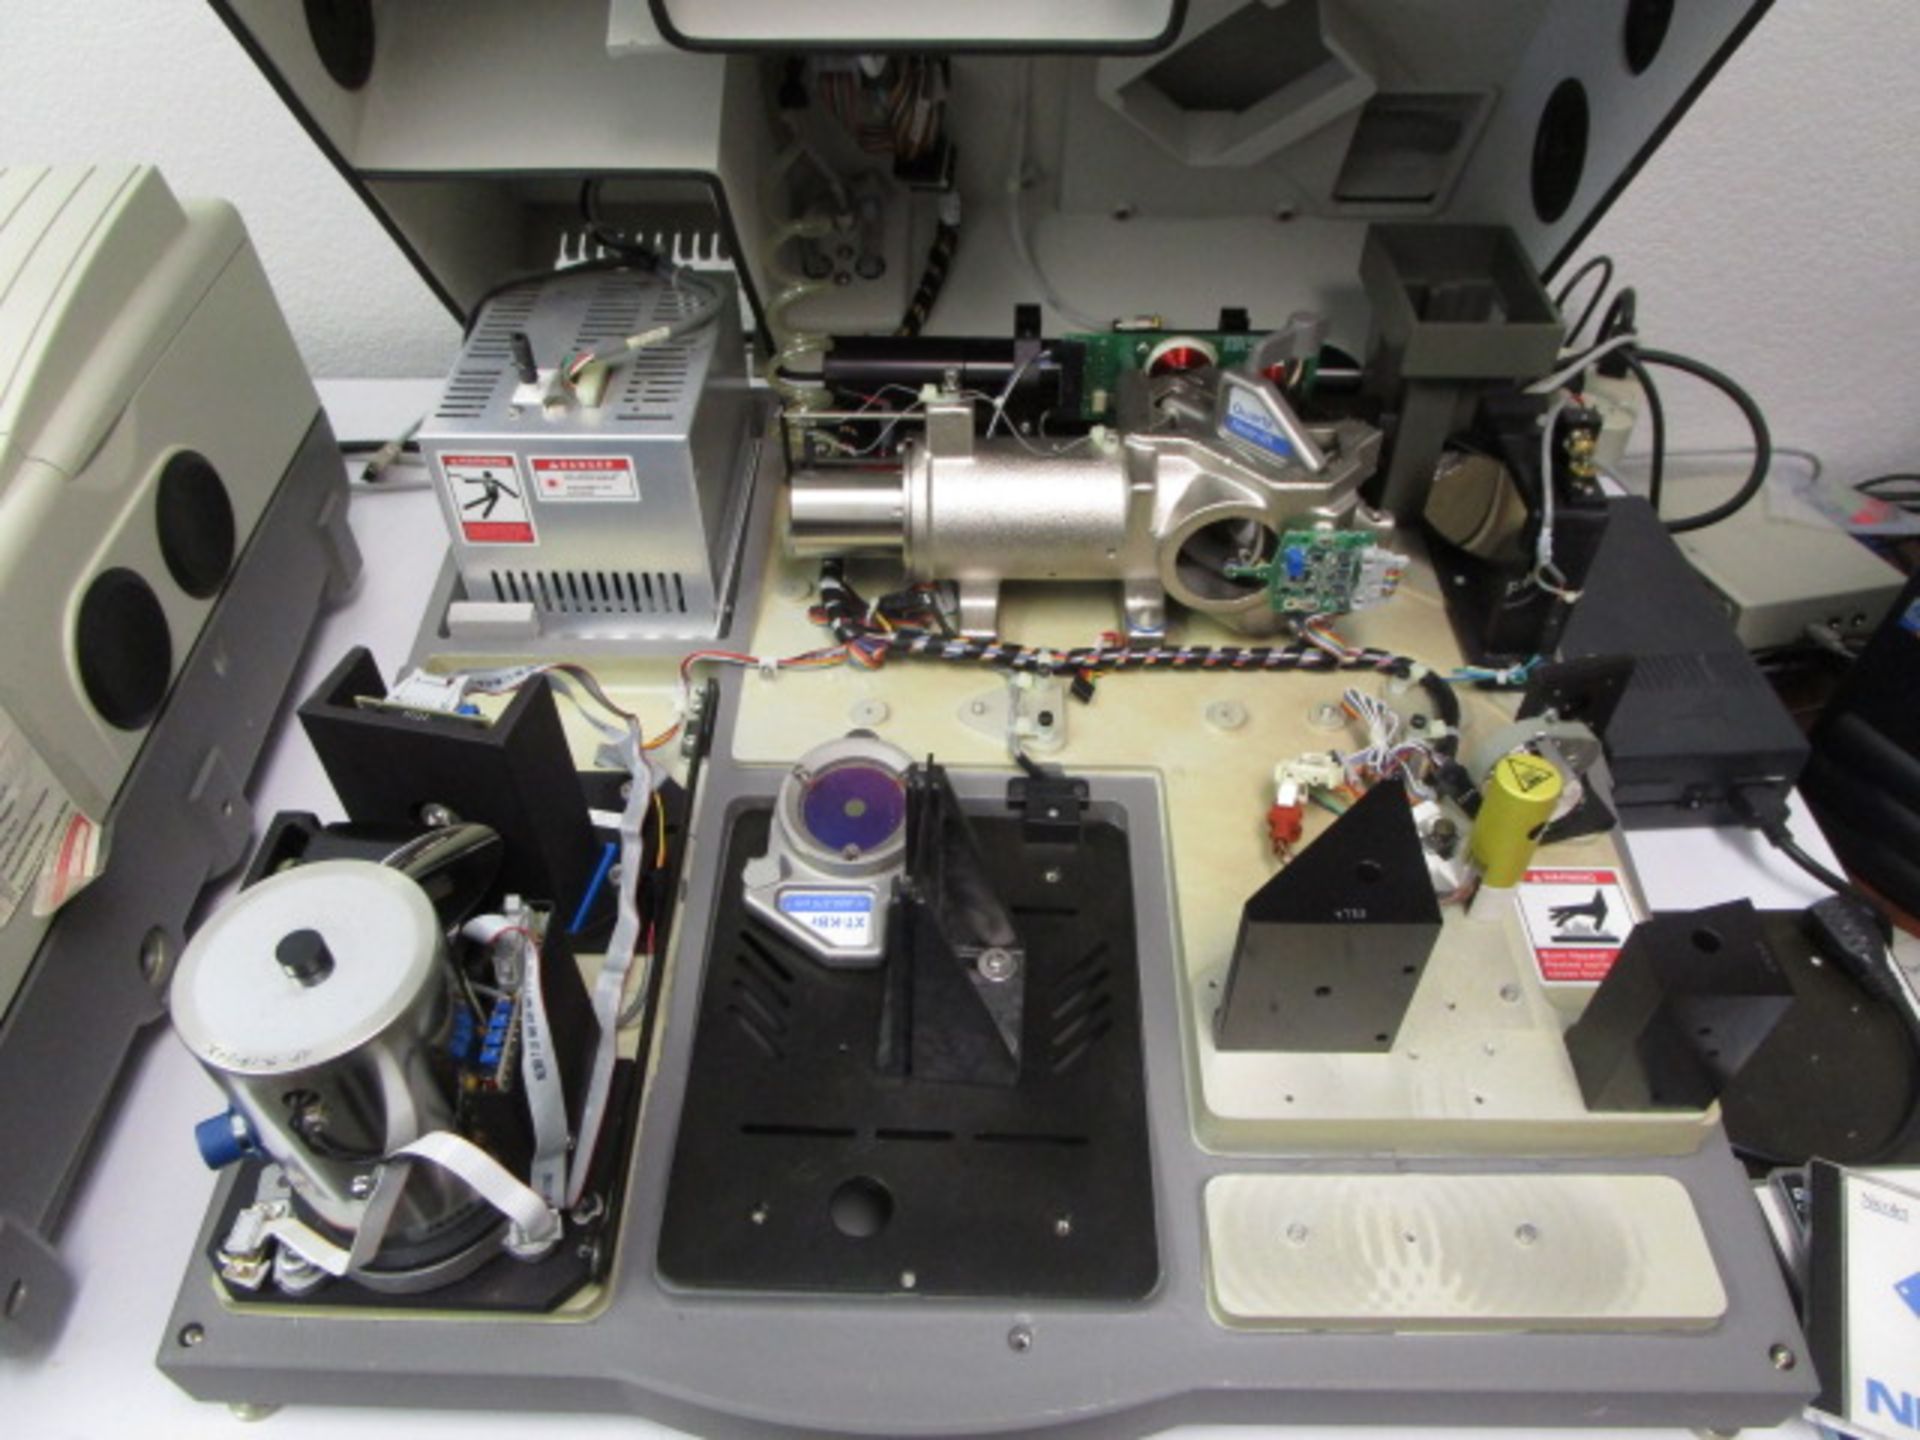 Nicolet Magna- IR 560 Spectromer E.S.P. to include software tutorial, and "32 bit" SW. Near and